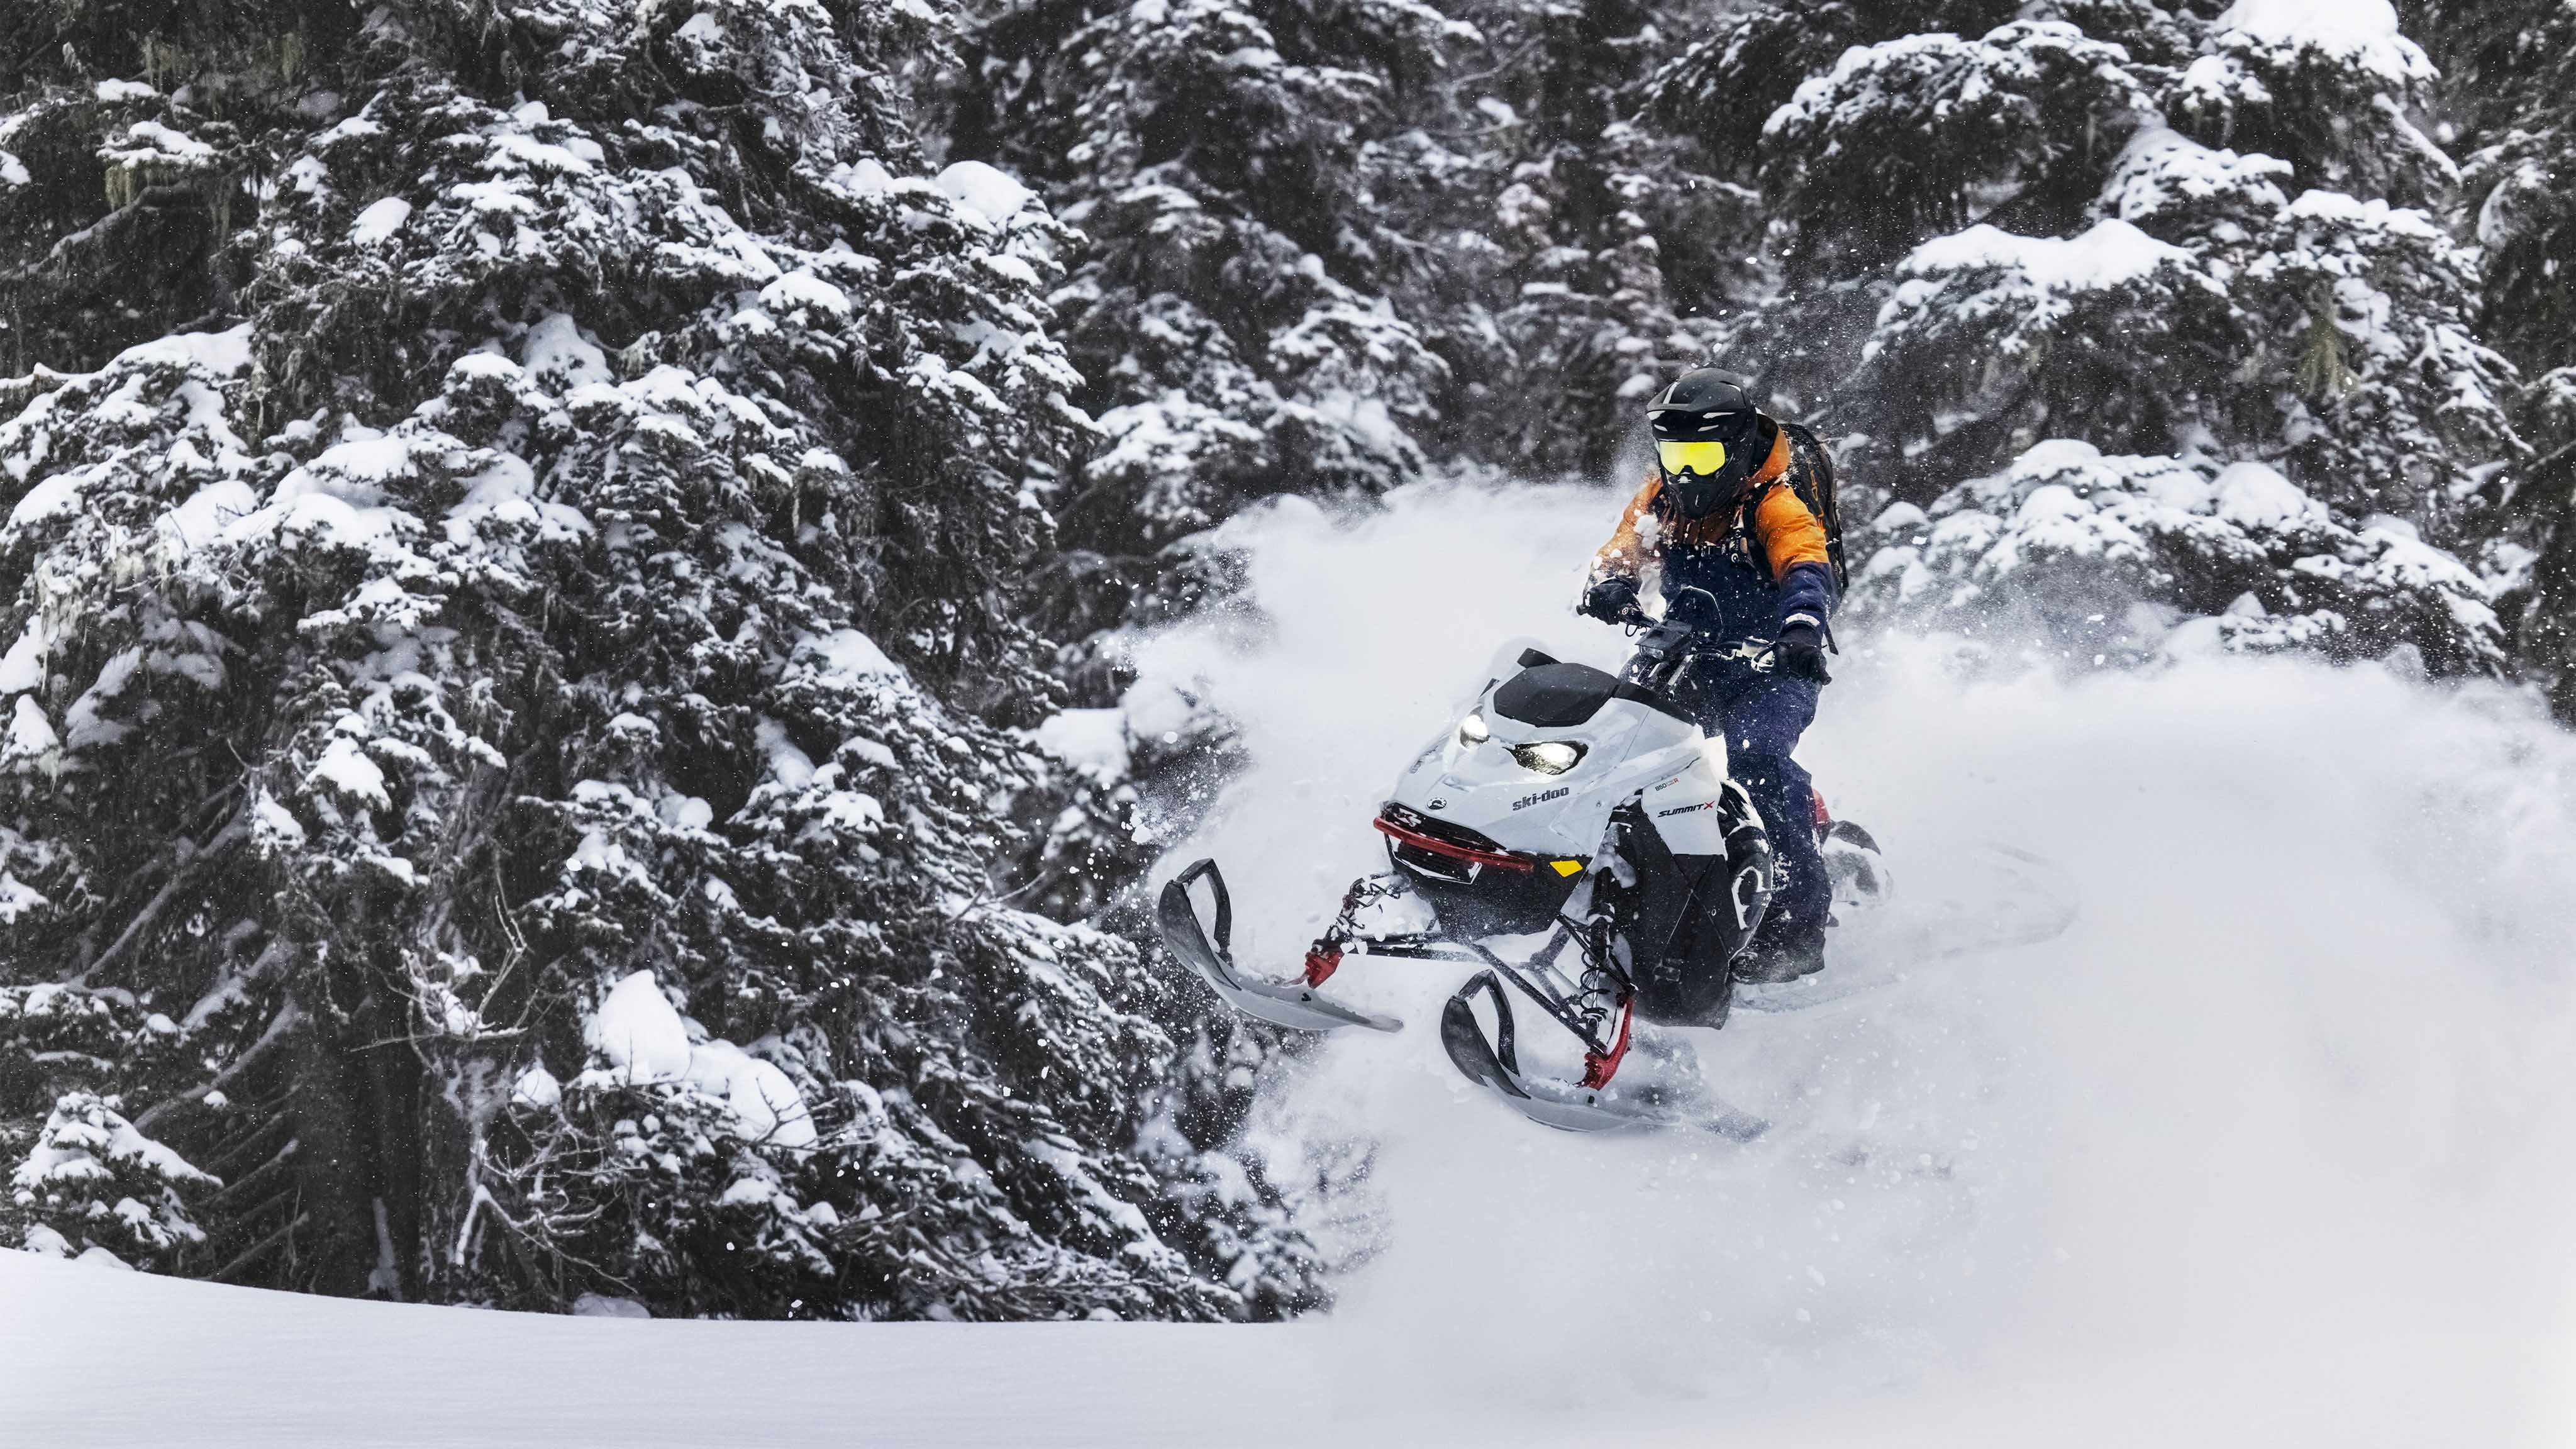 2023 Ski-Doo Summit jumping during an Off-Trail session